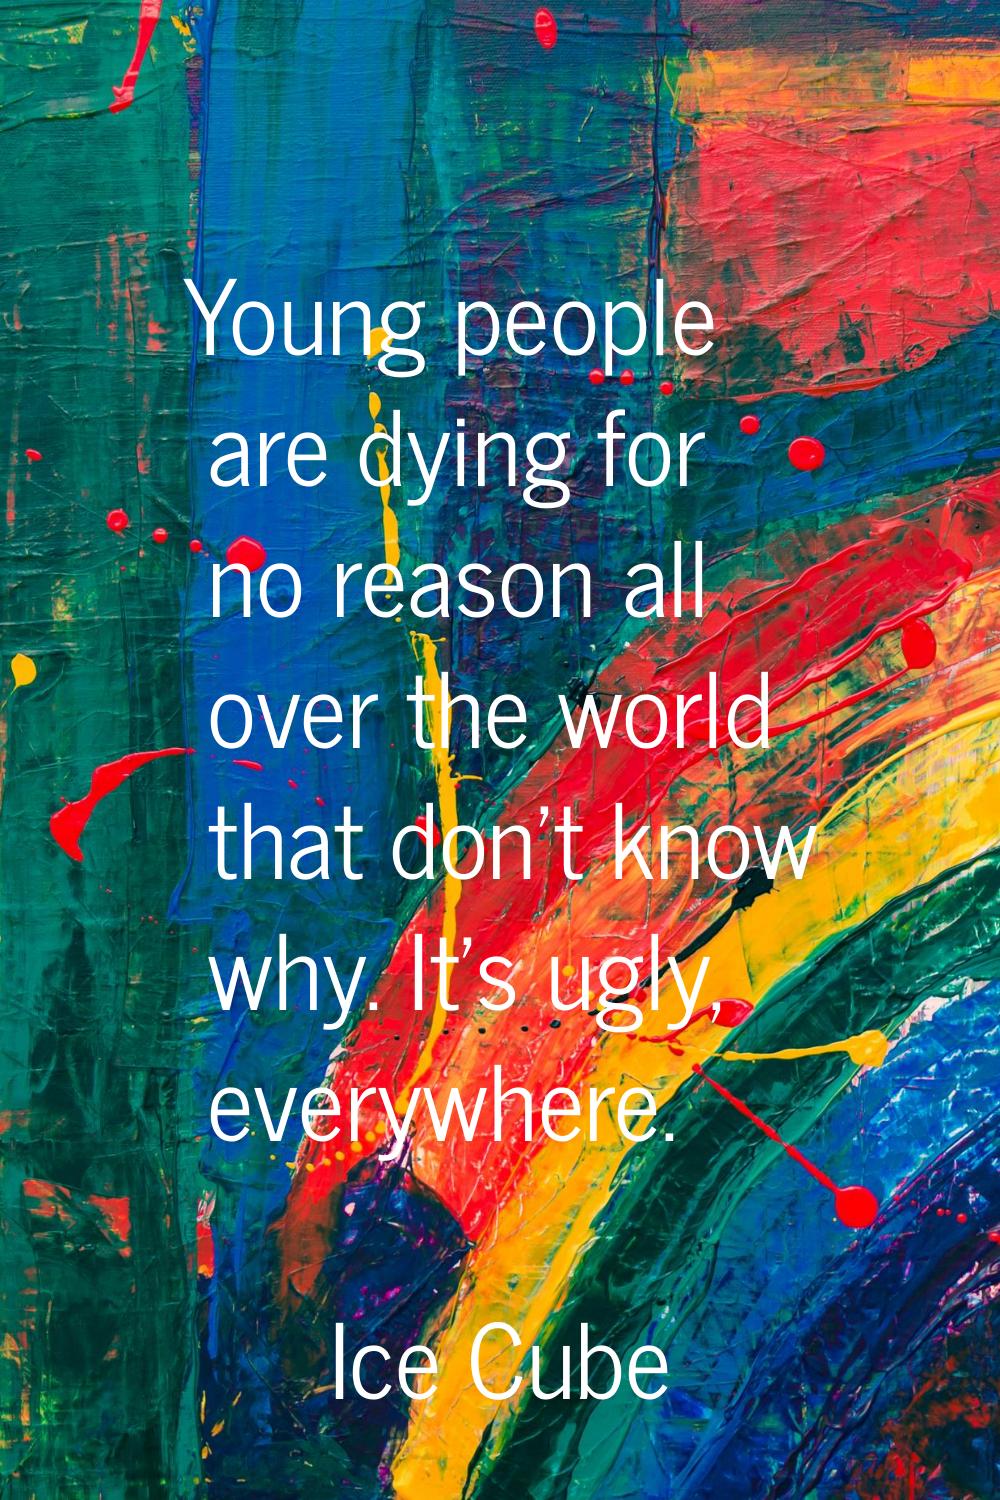 Young people are dying for no reason all over the world that don't know why. It's ugly, everywhere.